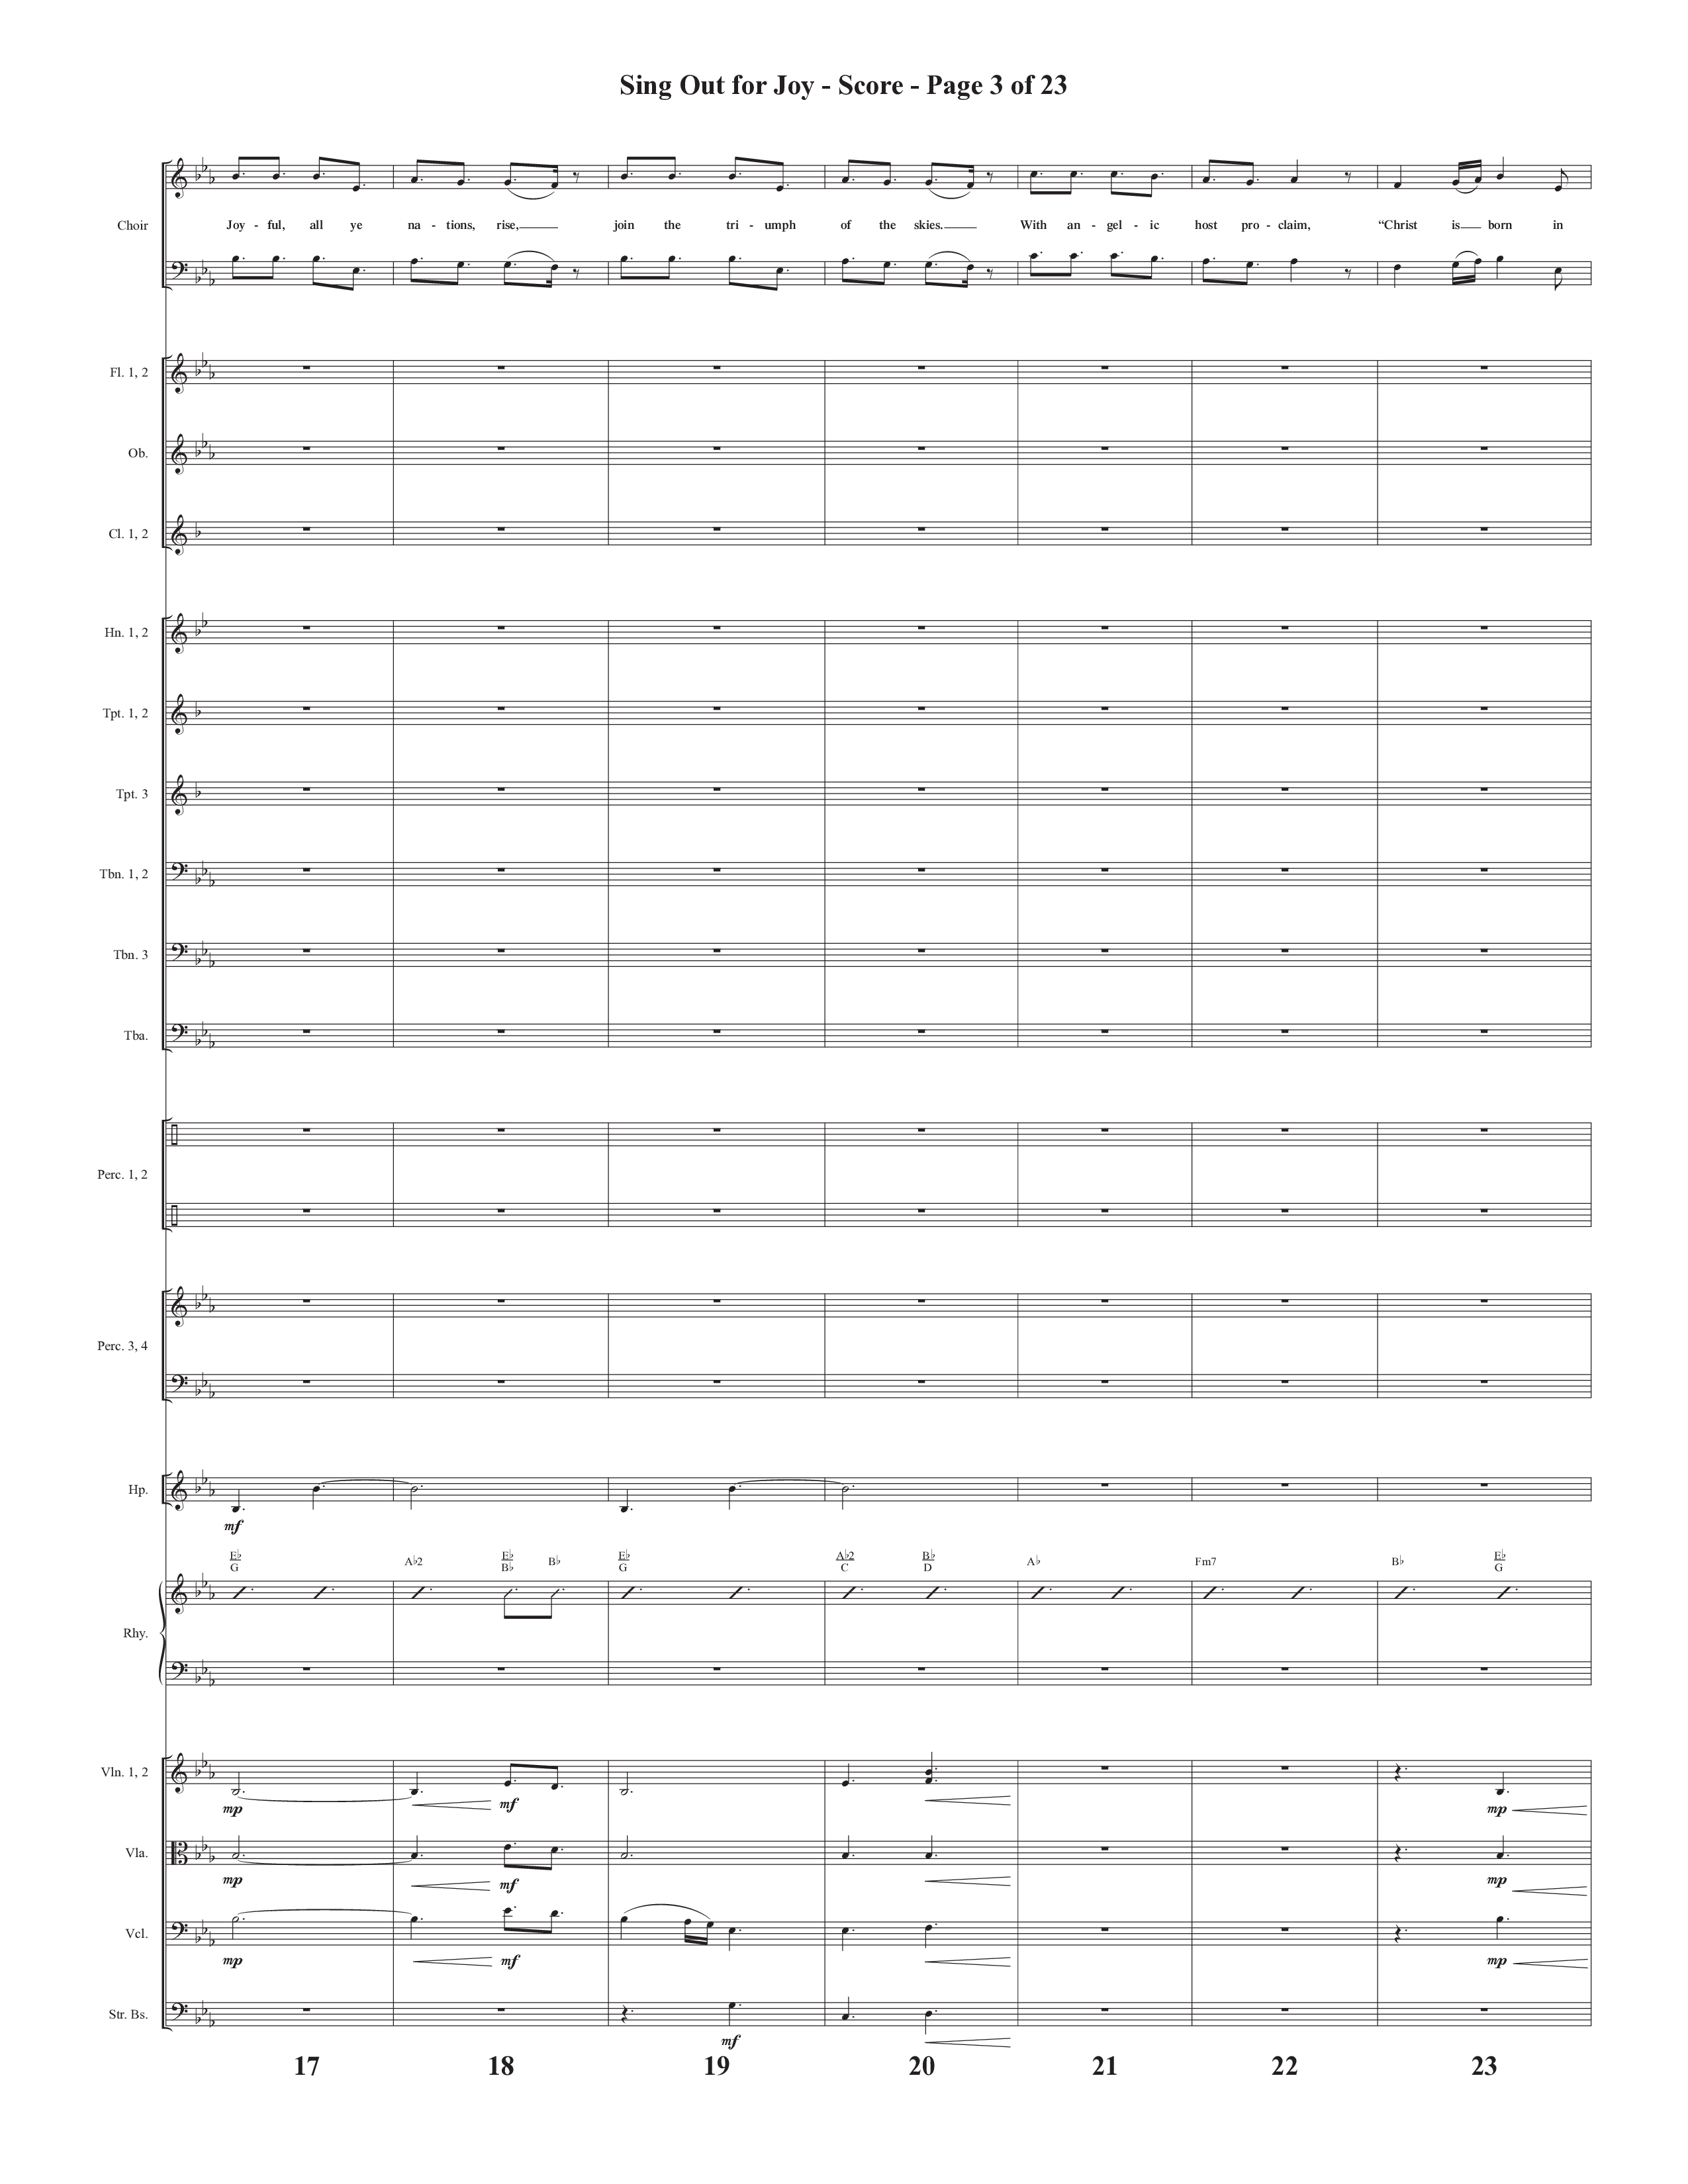 Sing Out For Joy (Choral Anthem SATB) Orchestration (Semsen Music / Arr. John Bolin / Orch. Cliff Duren)